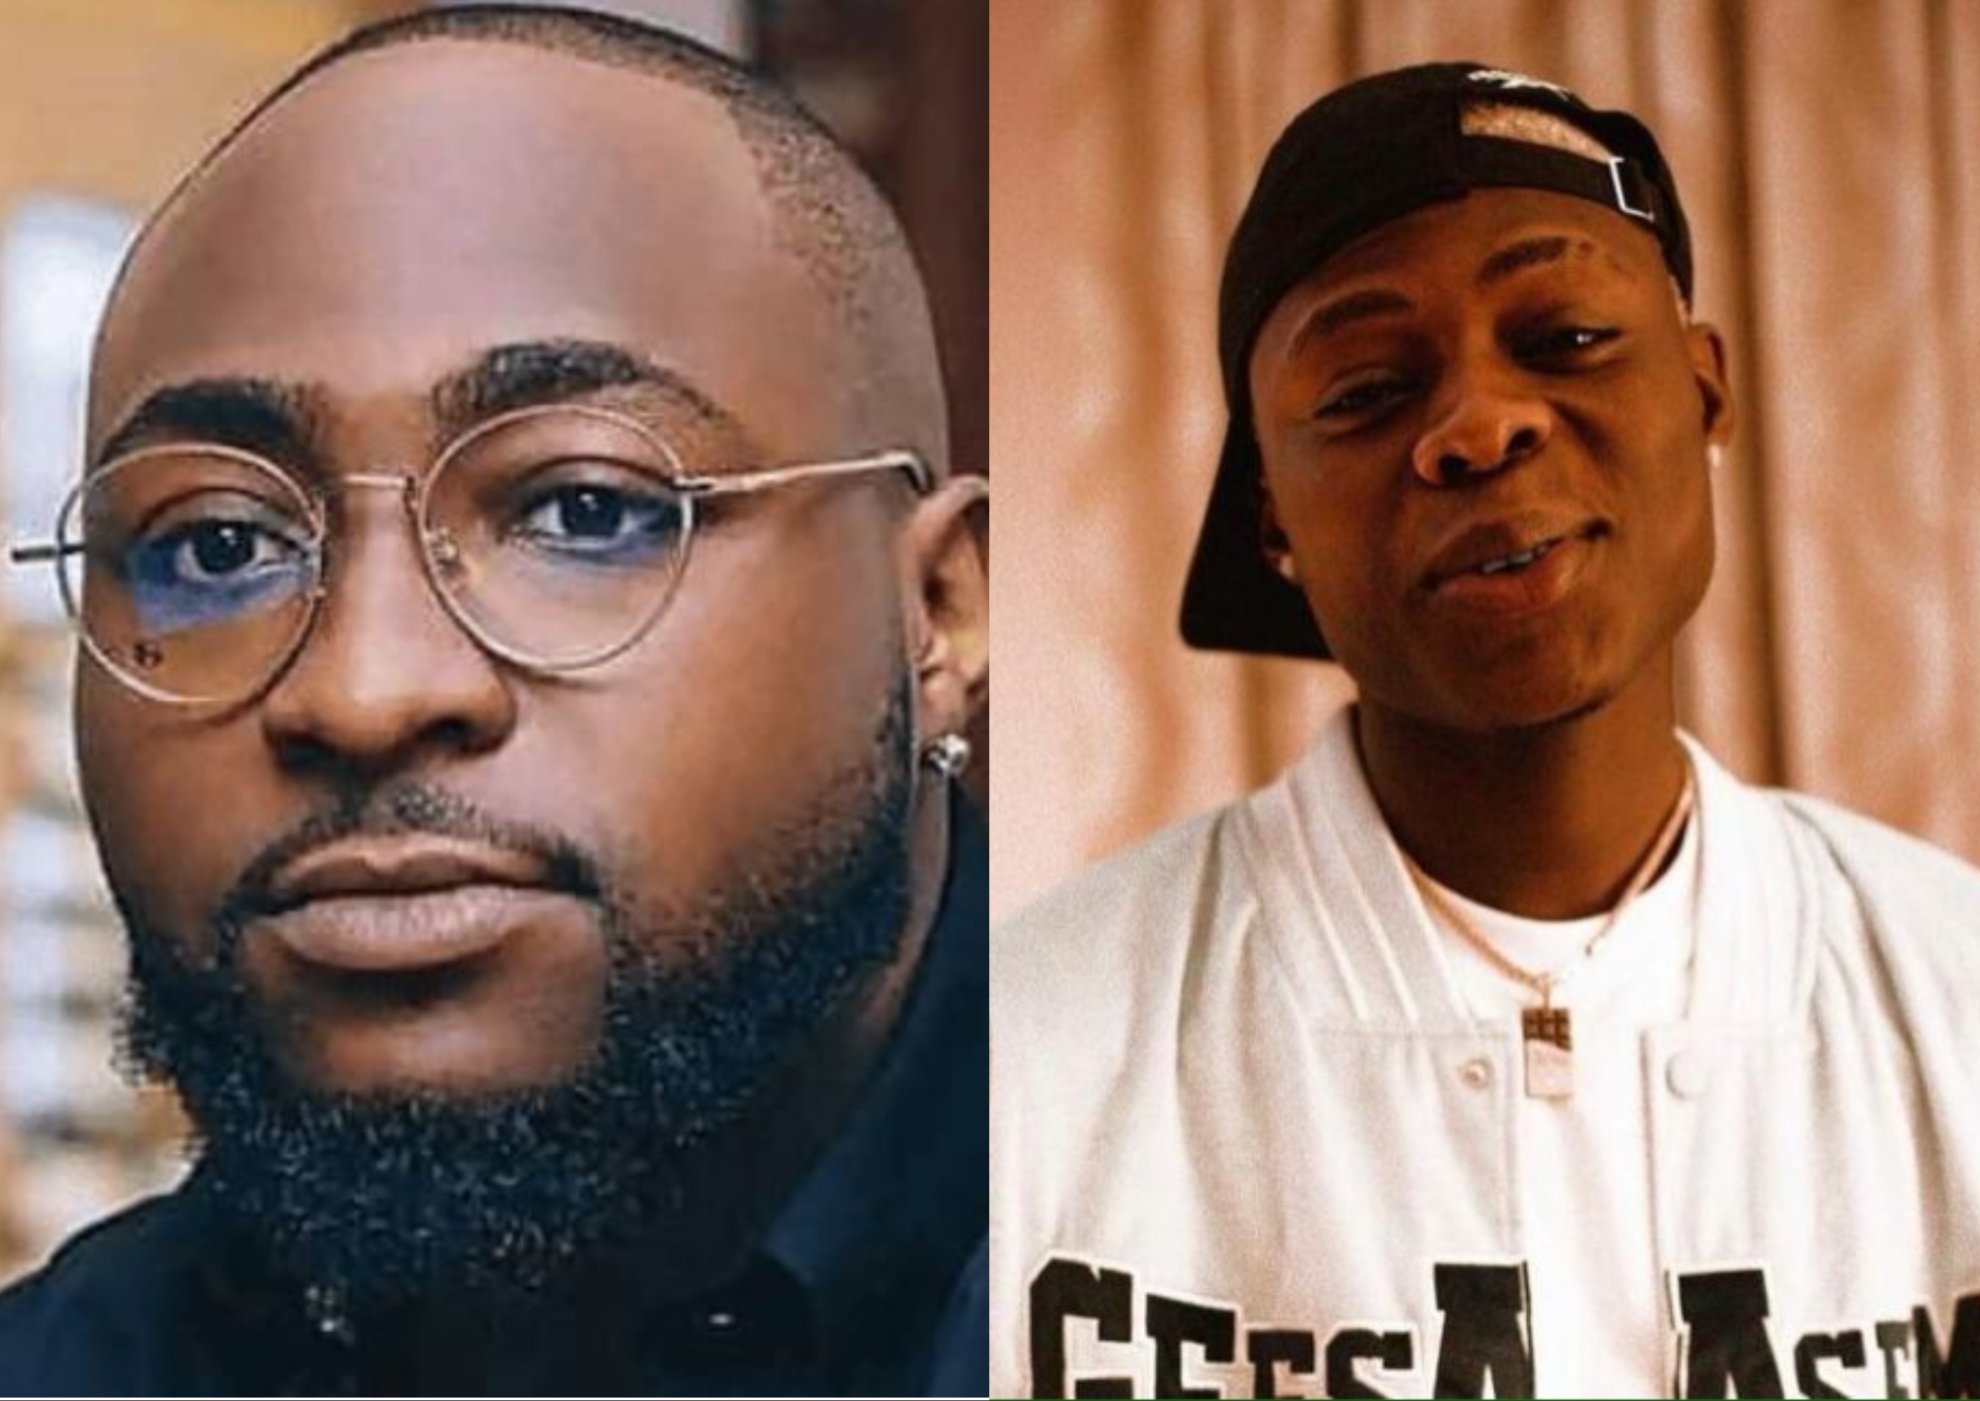 Davido Reveals What Mohbad’s Spirit Does To Him At Nights